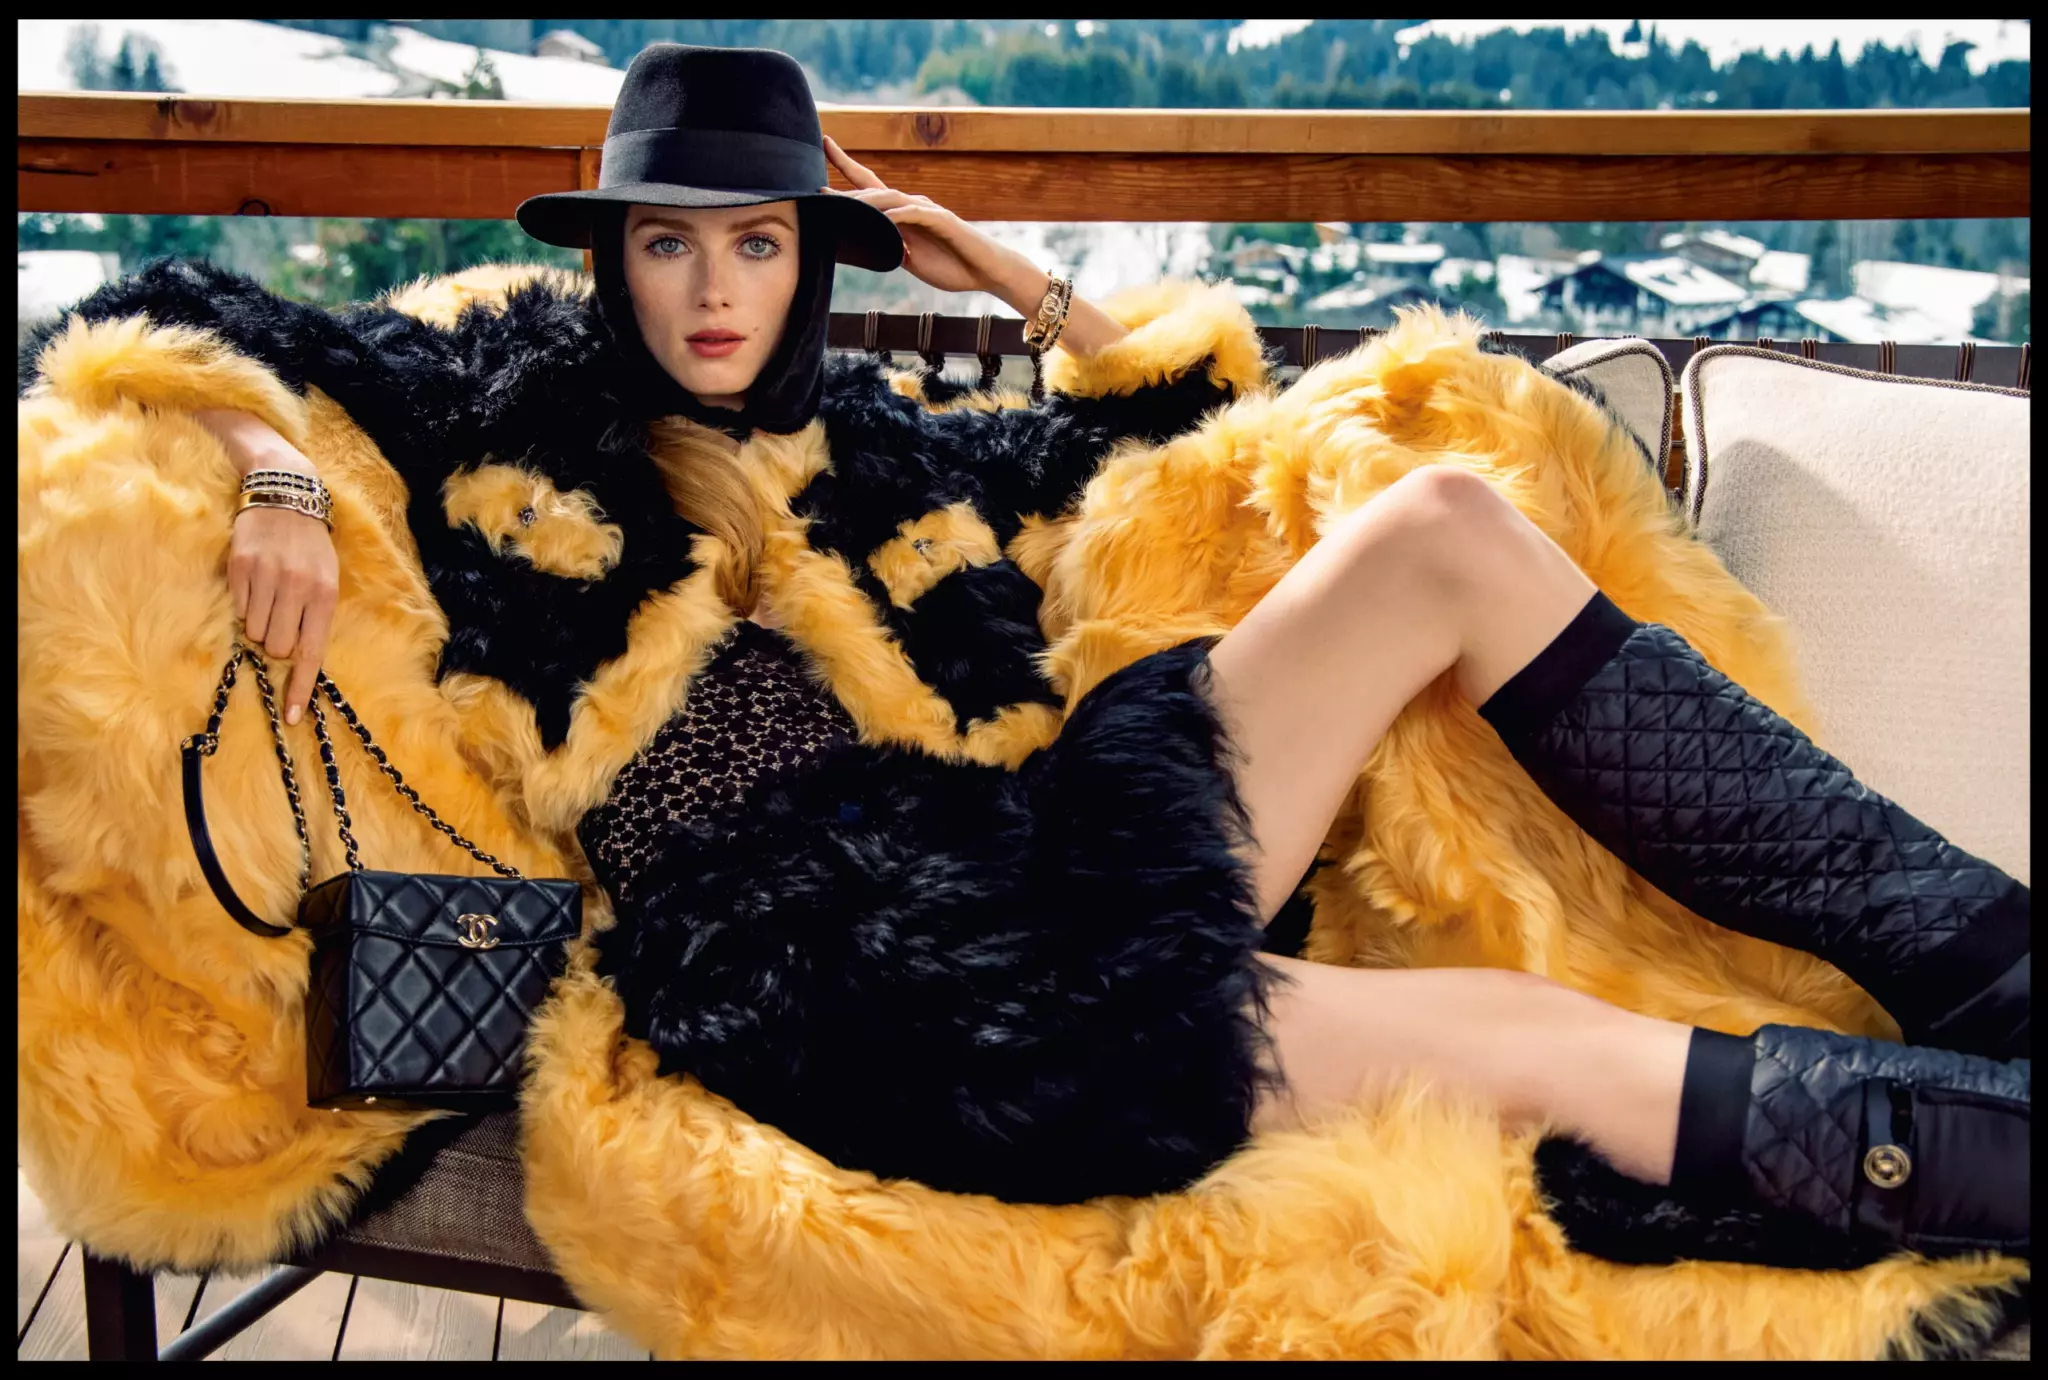 Fall-Winter 21/22 trends that fashionistas will adopt this season. Focus on iconic Chanel, Baum und Pferdgarten, By Malina and By Malene Birger. 8